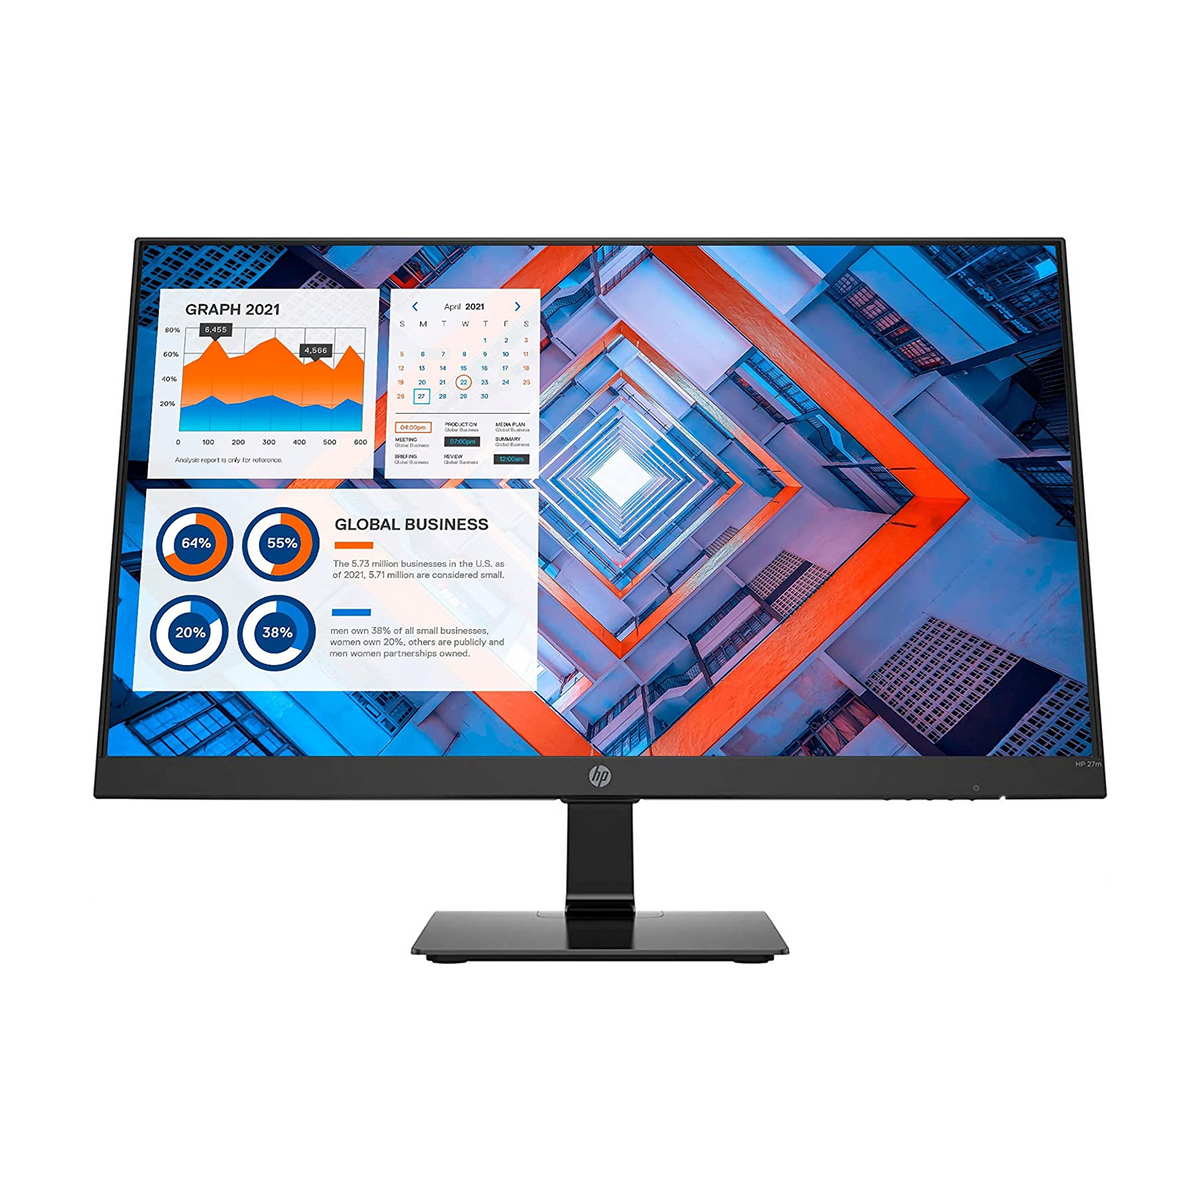 HP 27 inch 1080P Computer Monitor, 27" Full HD (1920 x 1080) 60Hz Anti-Glare IPS Display, HDMI, VGA, Ideal for Home and Business, Black (2022 Latest Model)